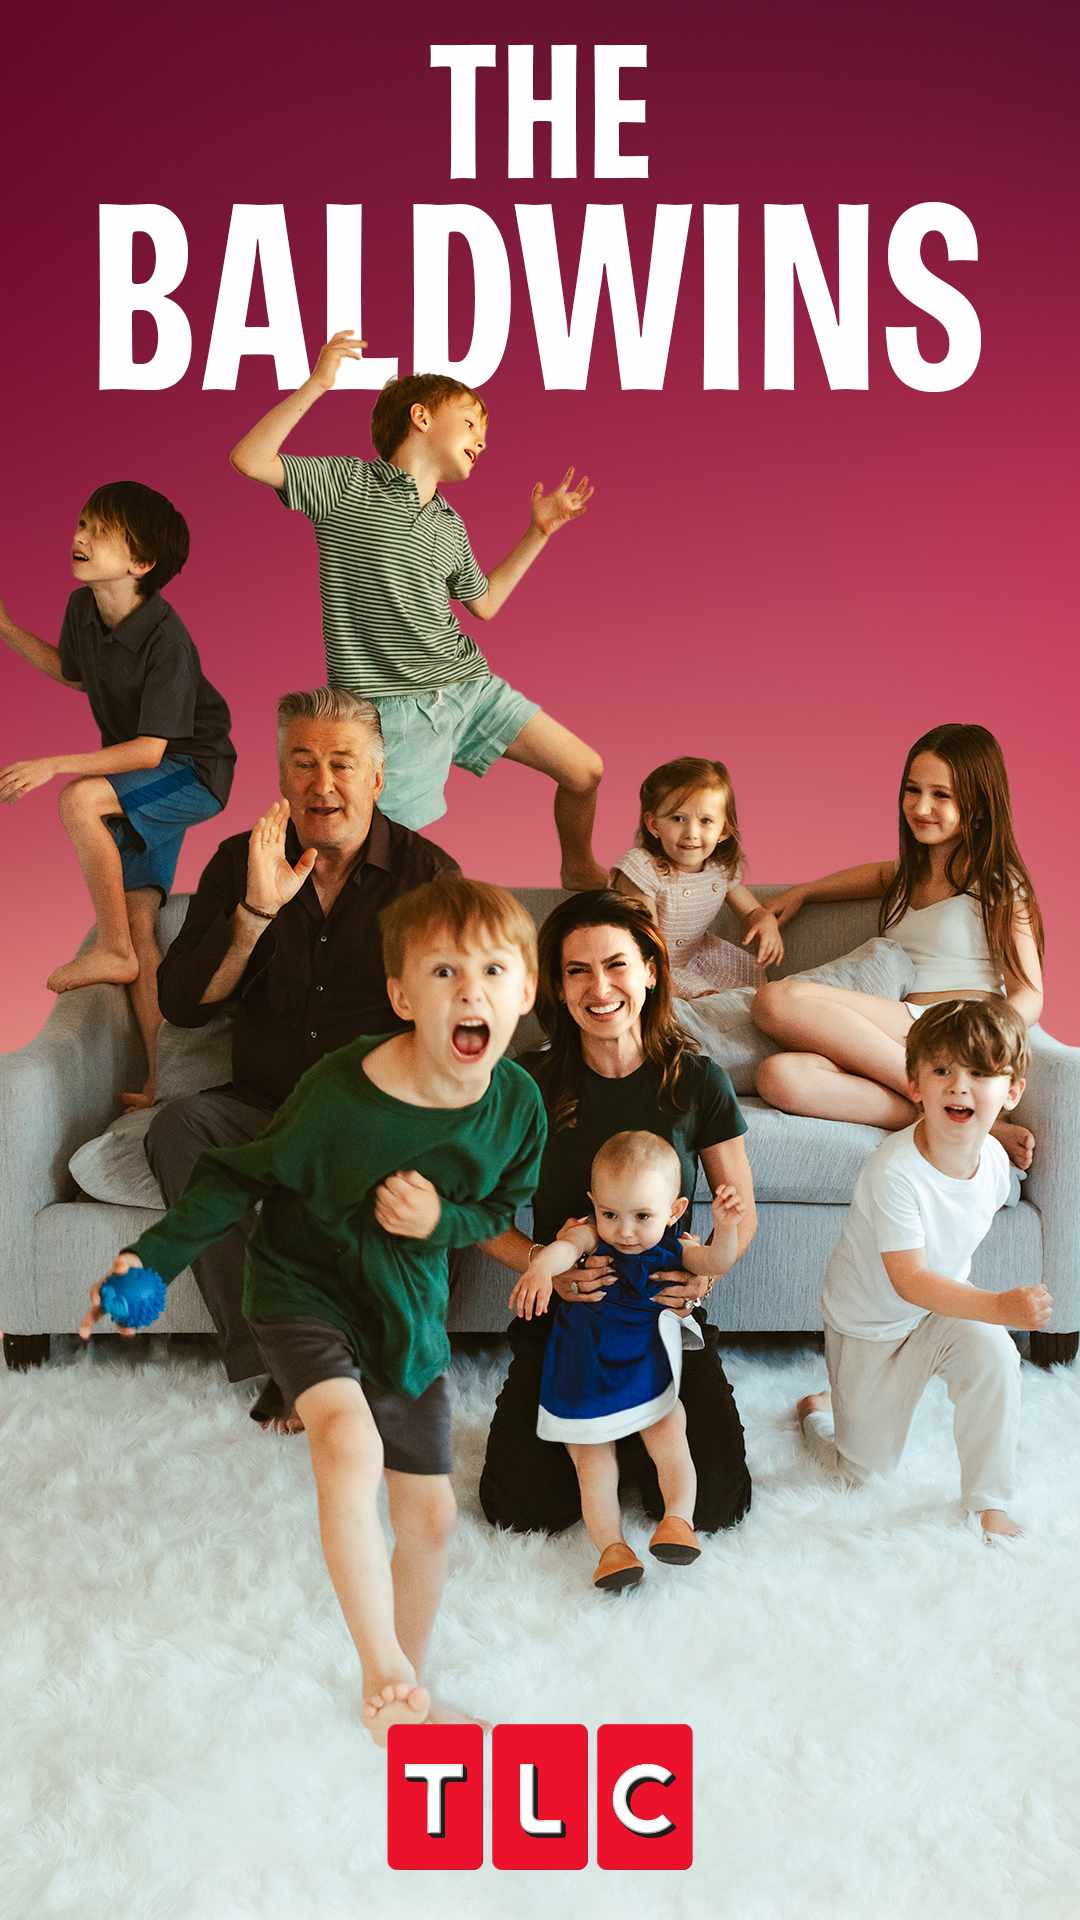 Alec and Hilaria Baldwin Announce Reality Show Featuring All 7 of Their Kids: 'Inviting You Into Our Home'